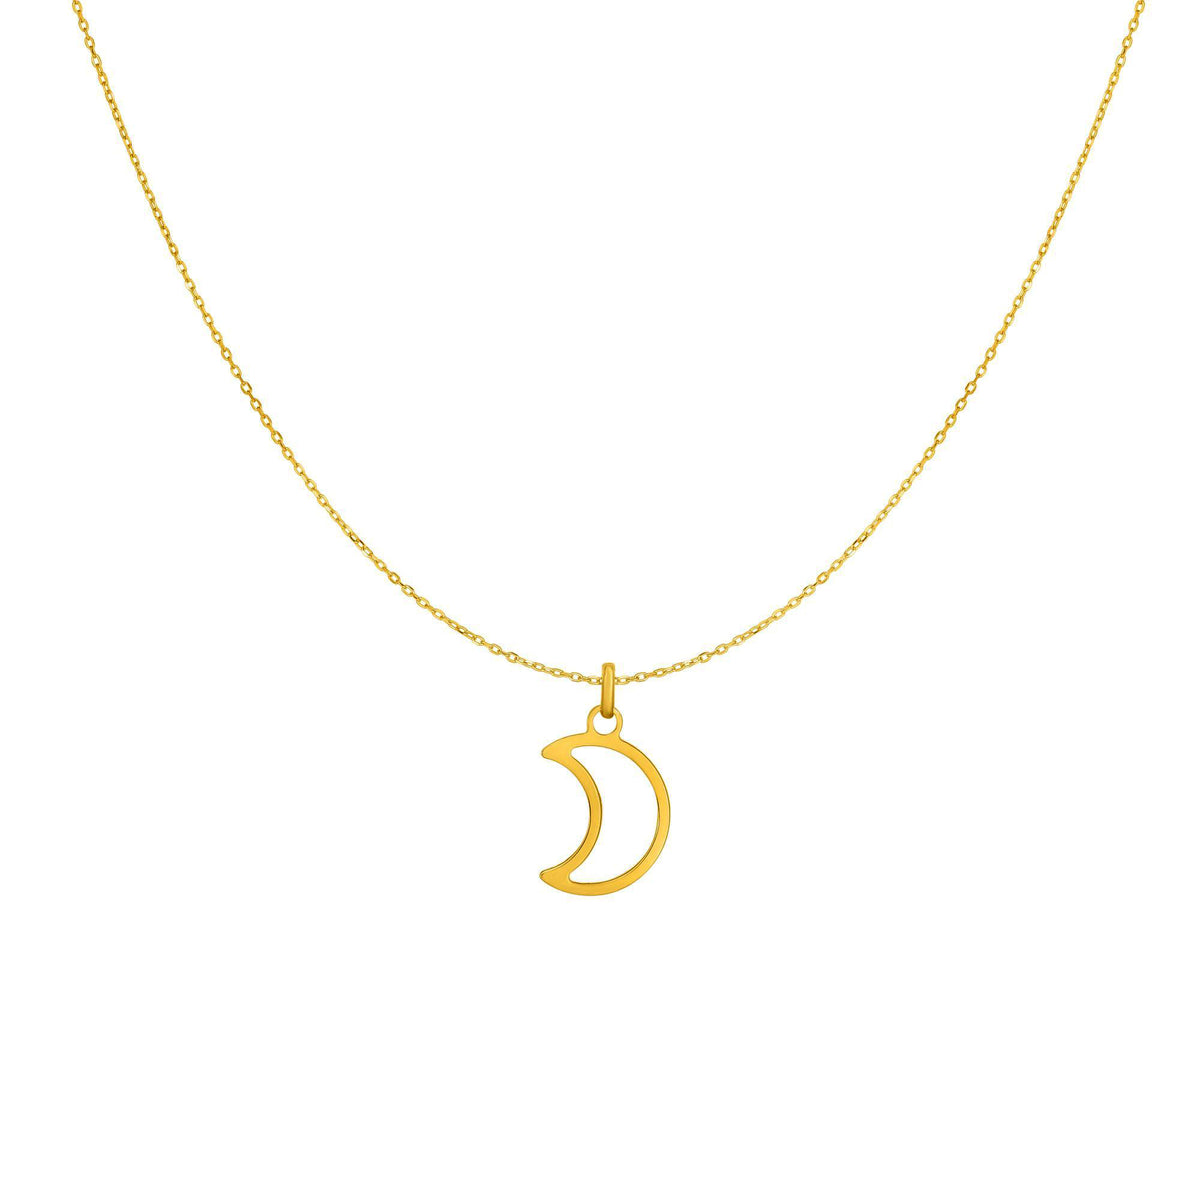 14k Yellow Gold Half Moon Charm Necklace, 18" fine designer jewelry for men and women